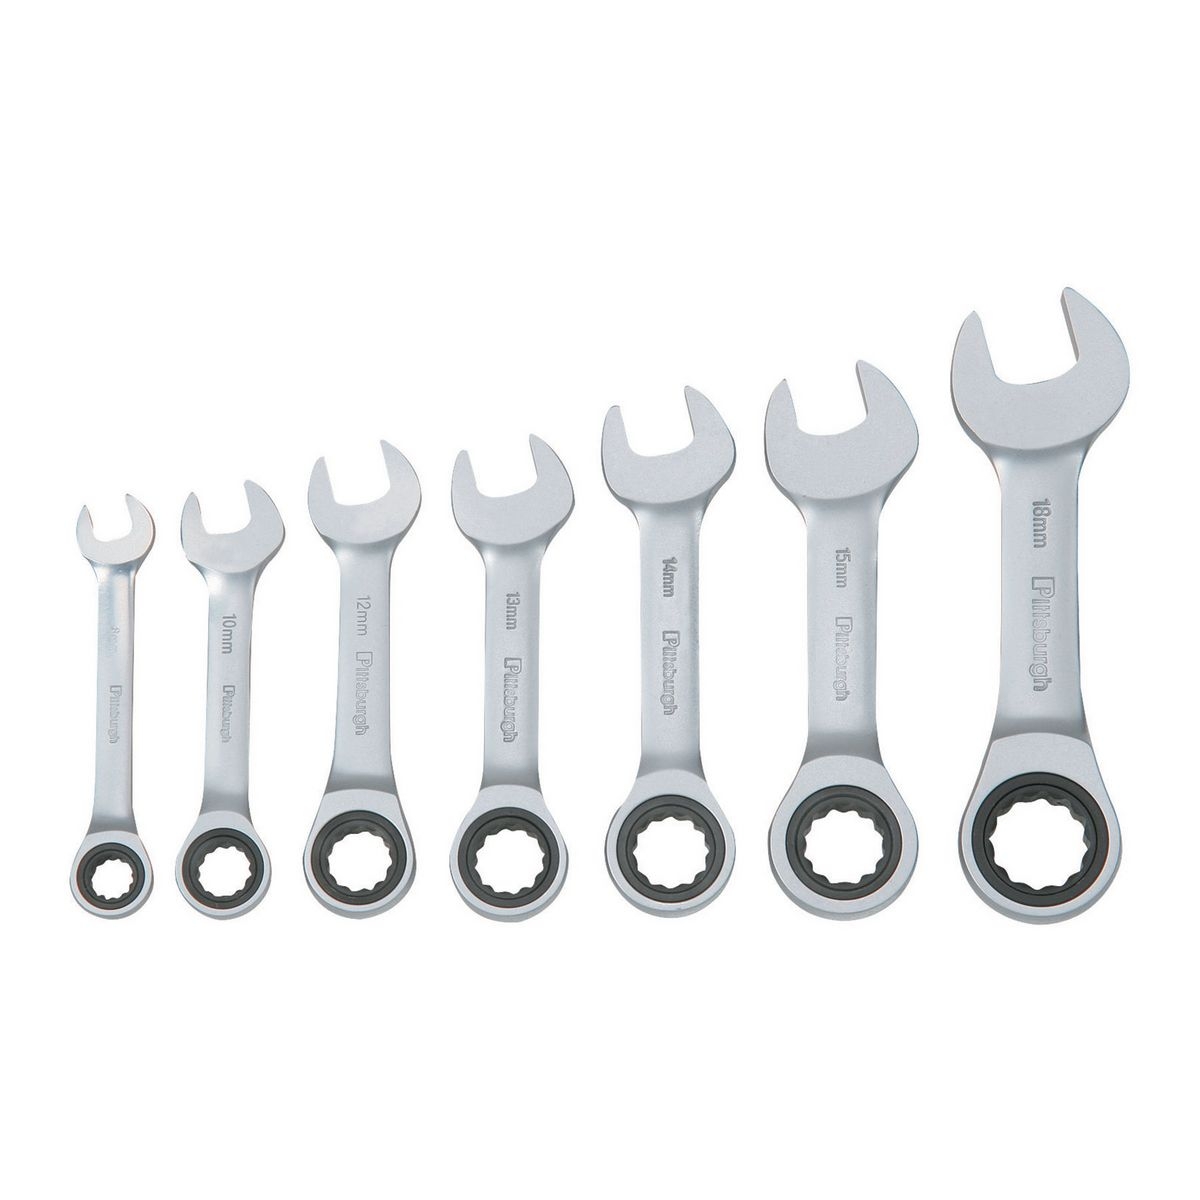 PITTSBURGH Metric Stubby Combination Ratcheting Wrench Set 7 Pc. - Item 93922 / 61402